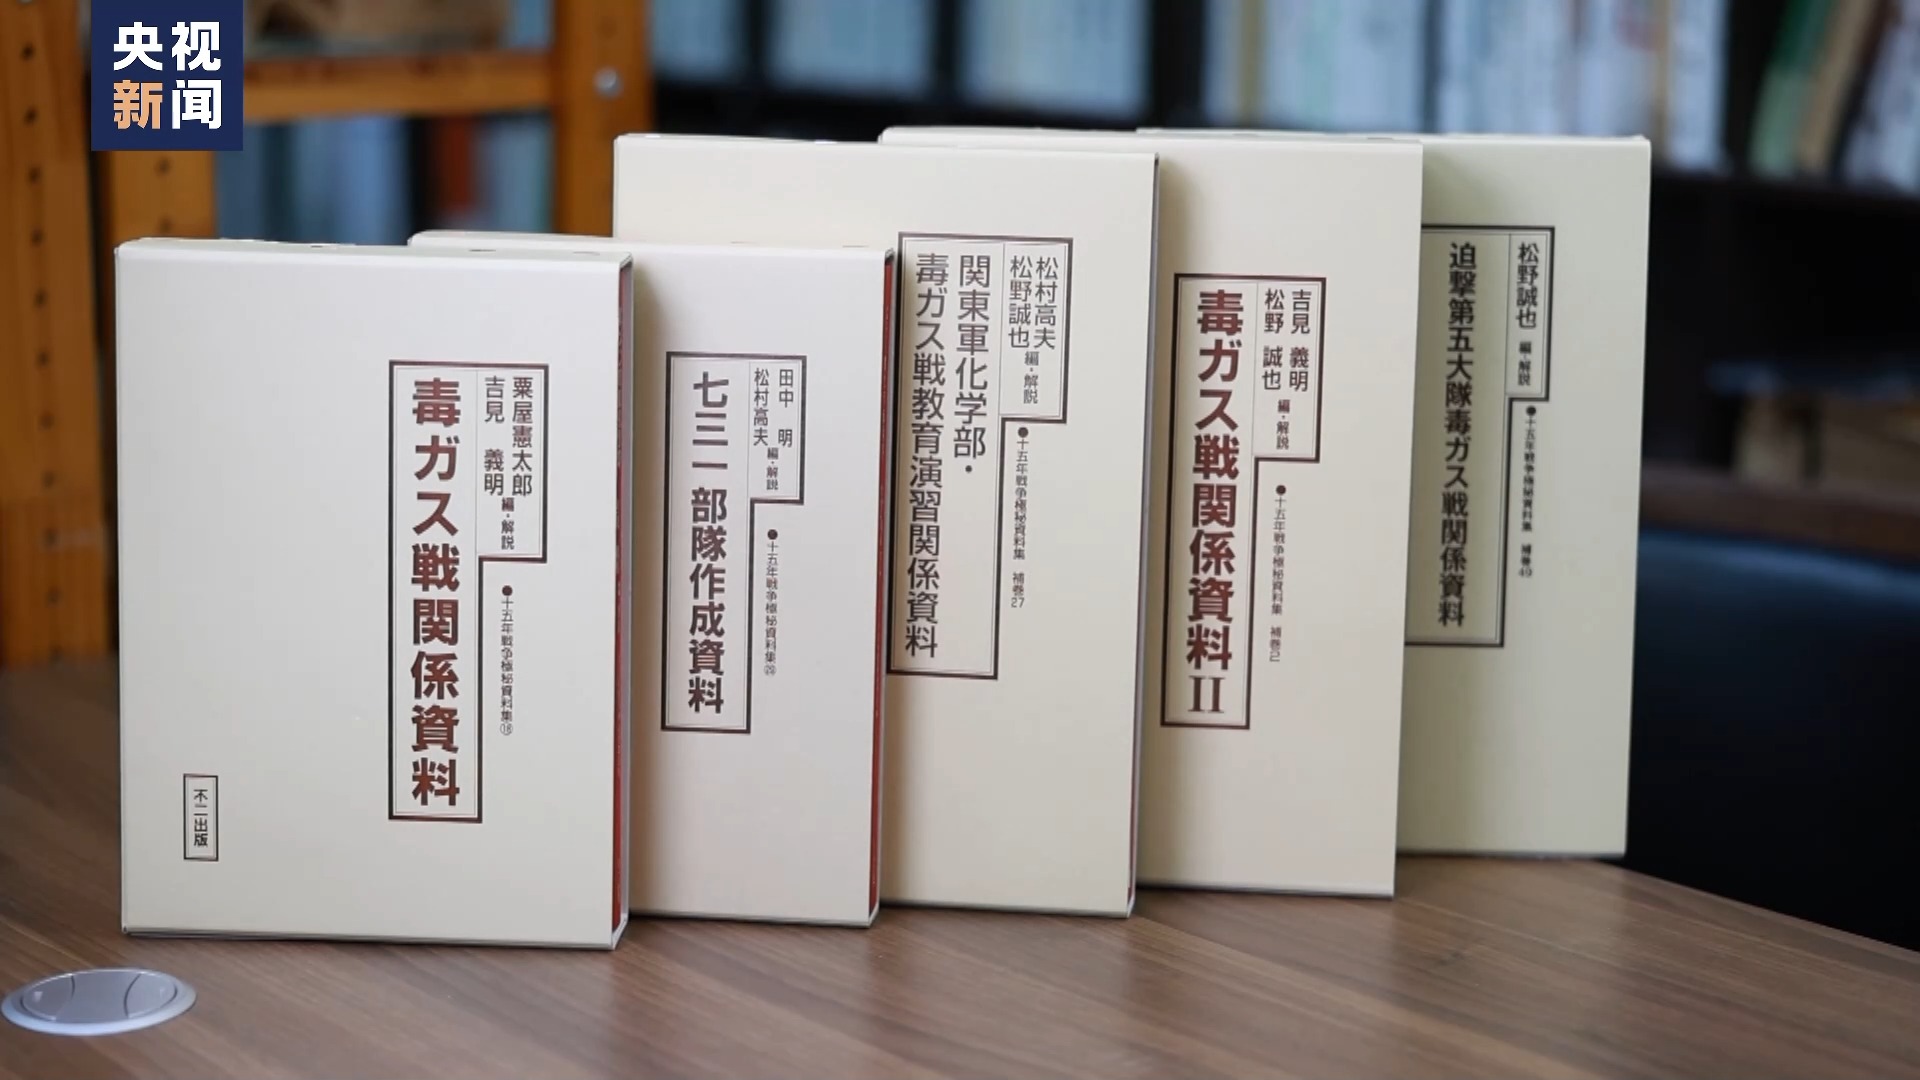 Books about the Japanese army's use of gas bombs. /China Media Group